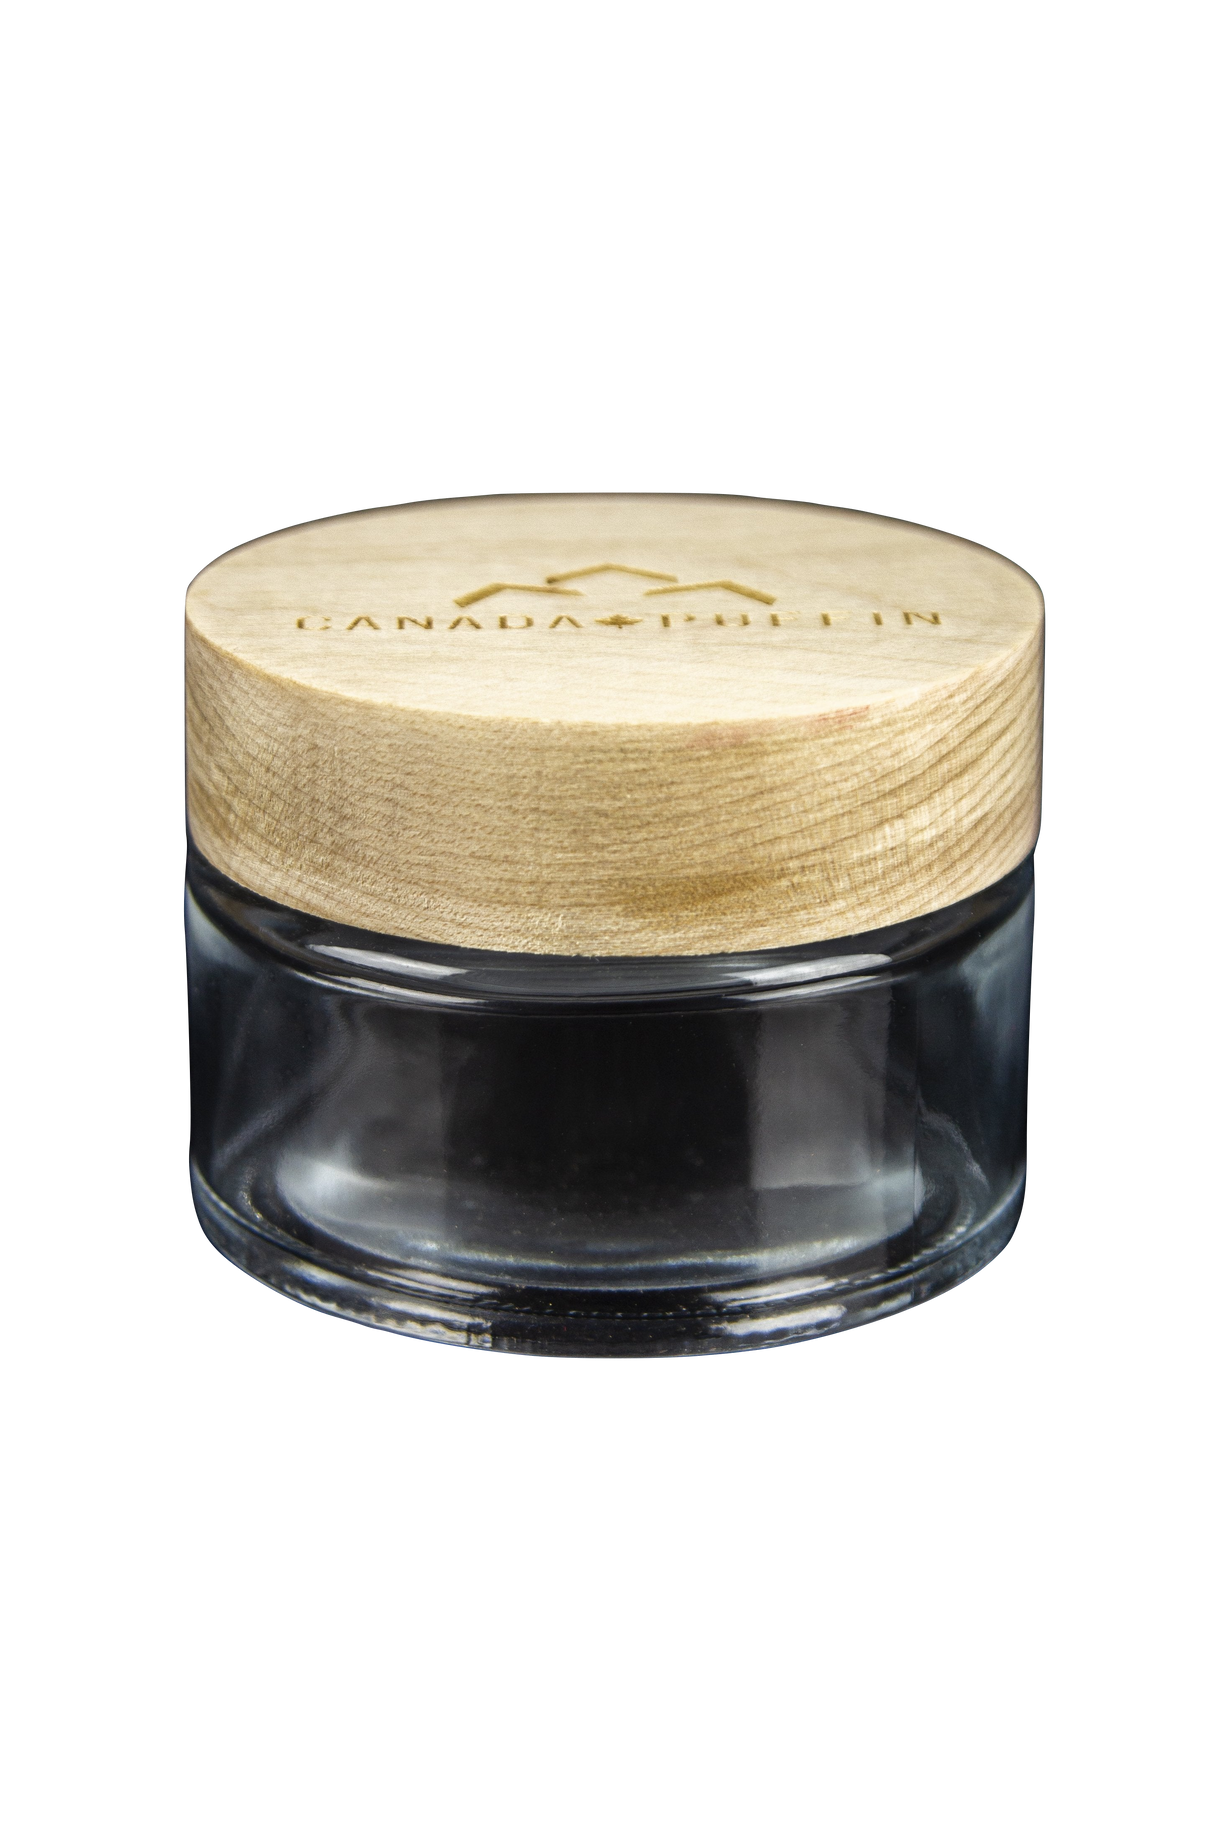 Canada Puffin Jasper Storage Jar with wooden lid, compact design for portability, front view on white background